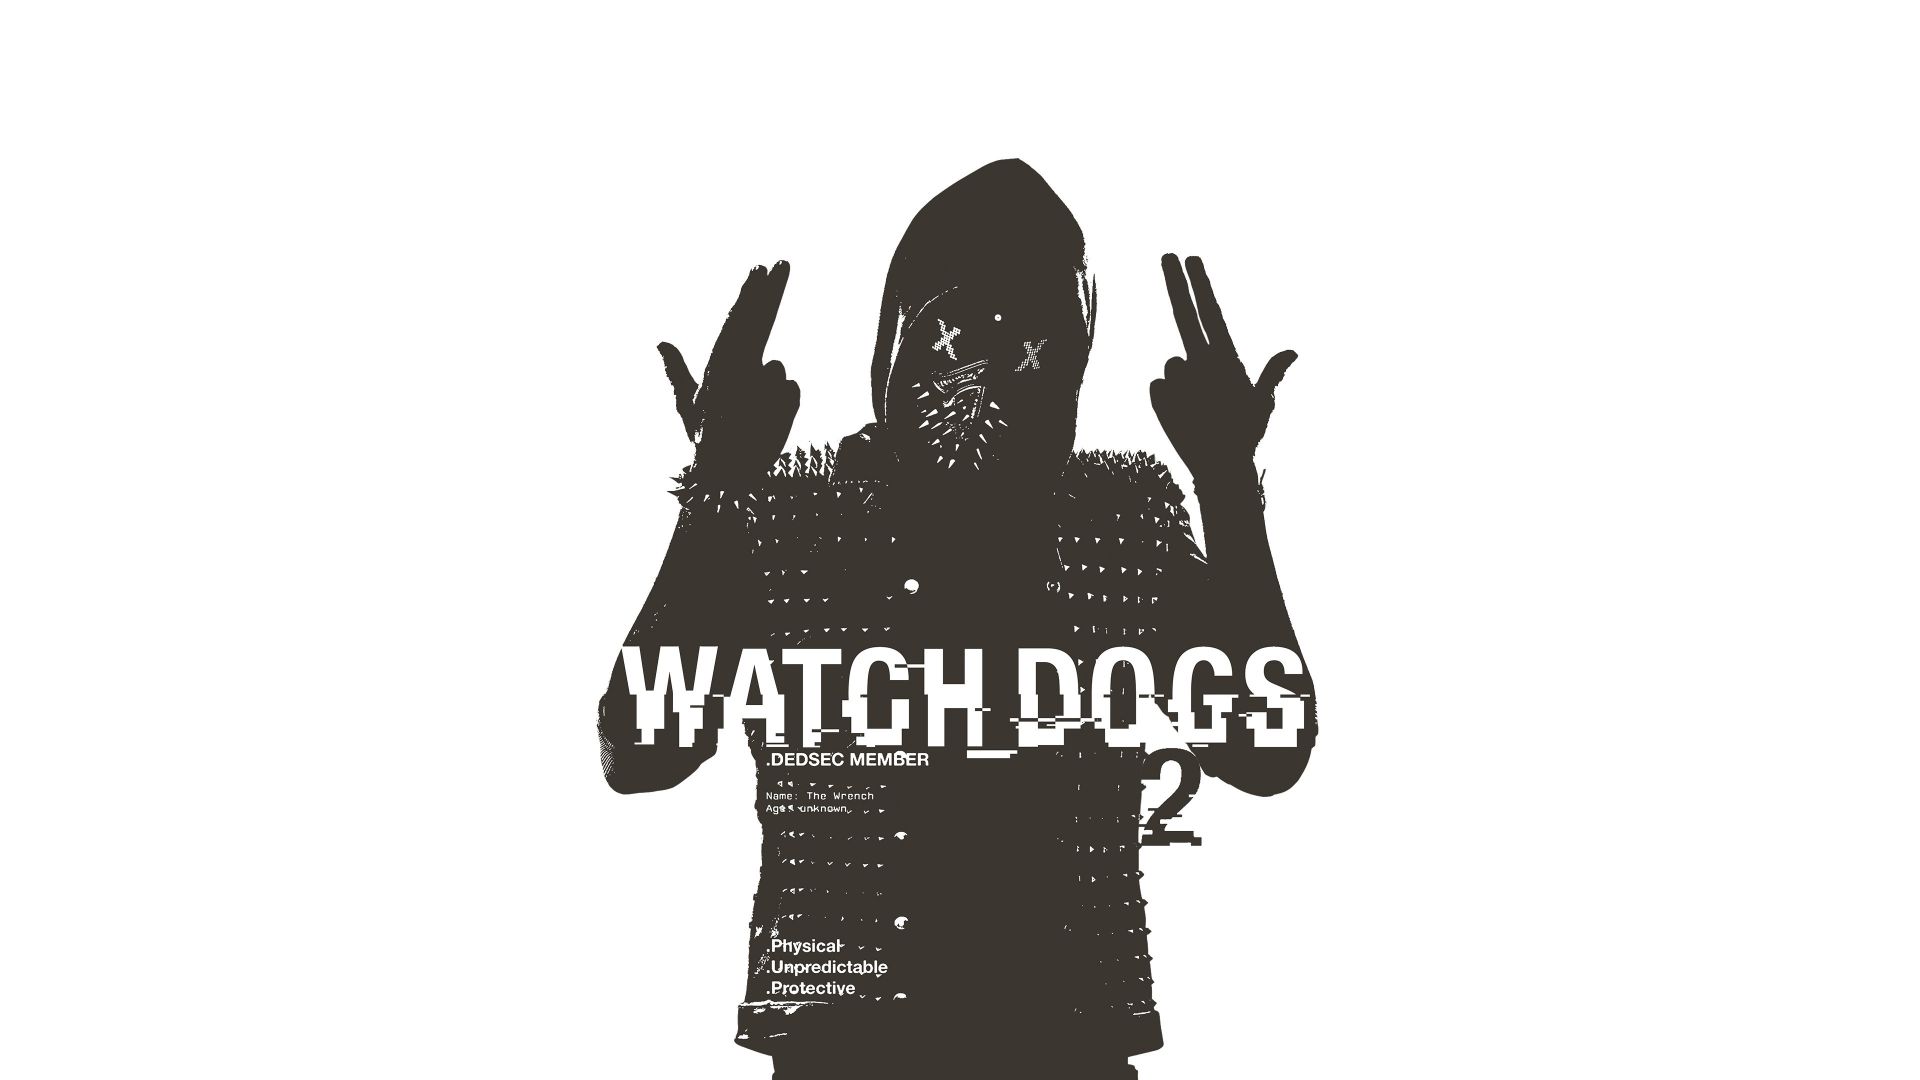 Desktop Wallpaper Watch Dogs 2 Gaming, Monochrome, Hd Image, Picture,  Background, Hby3ot